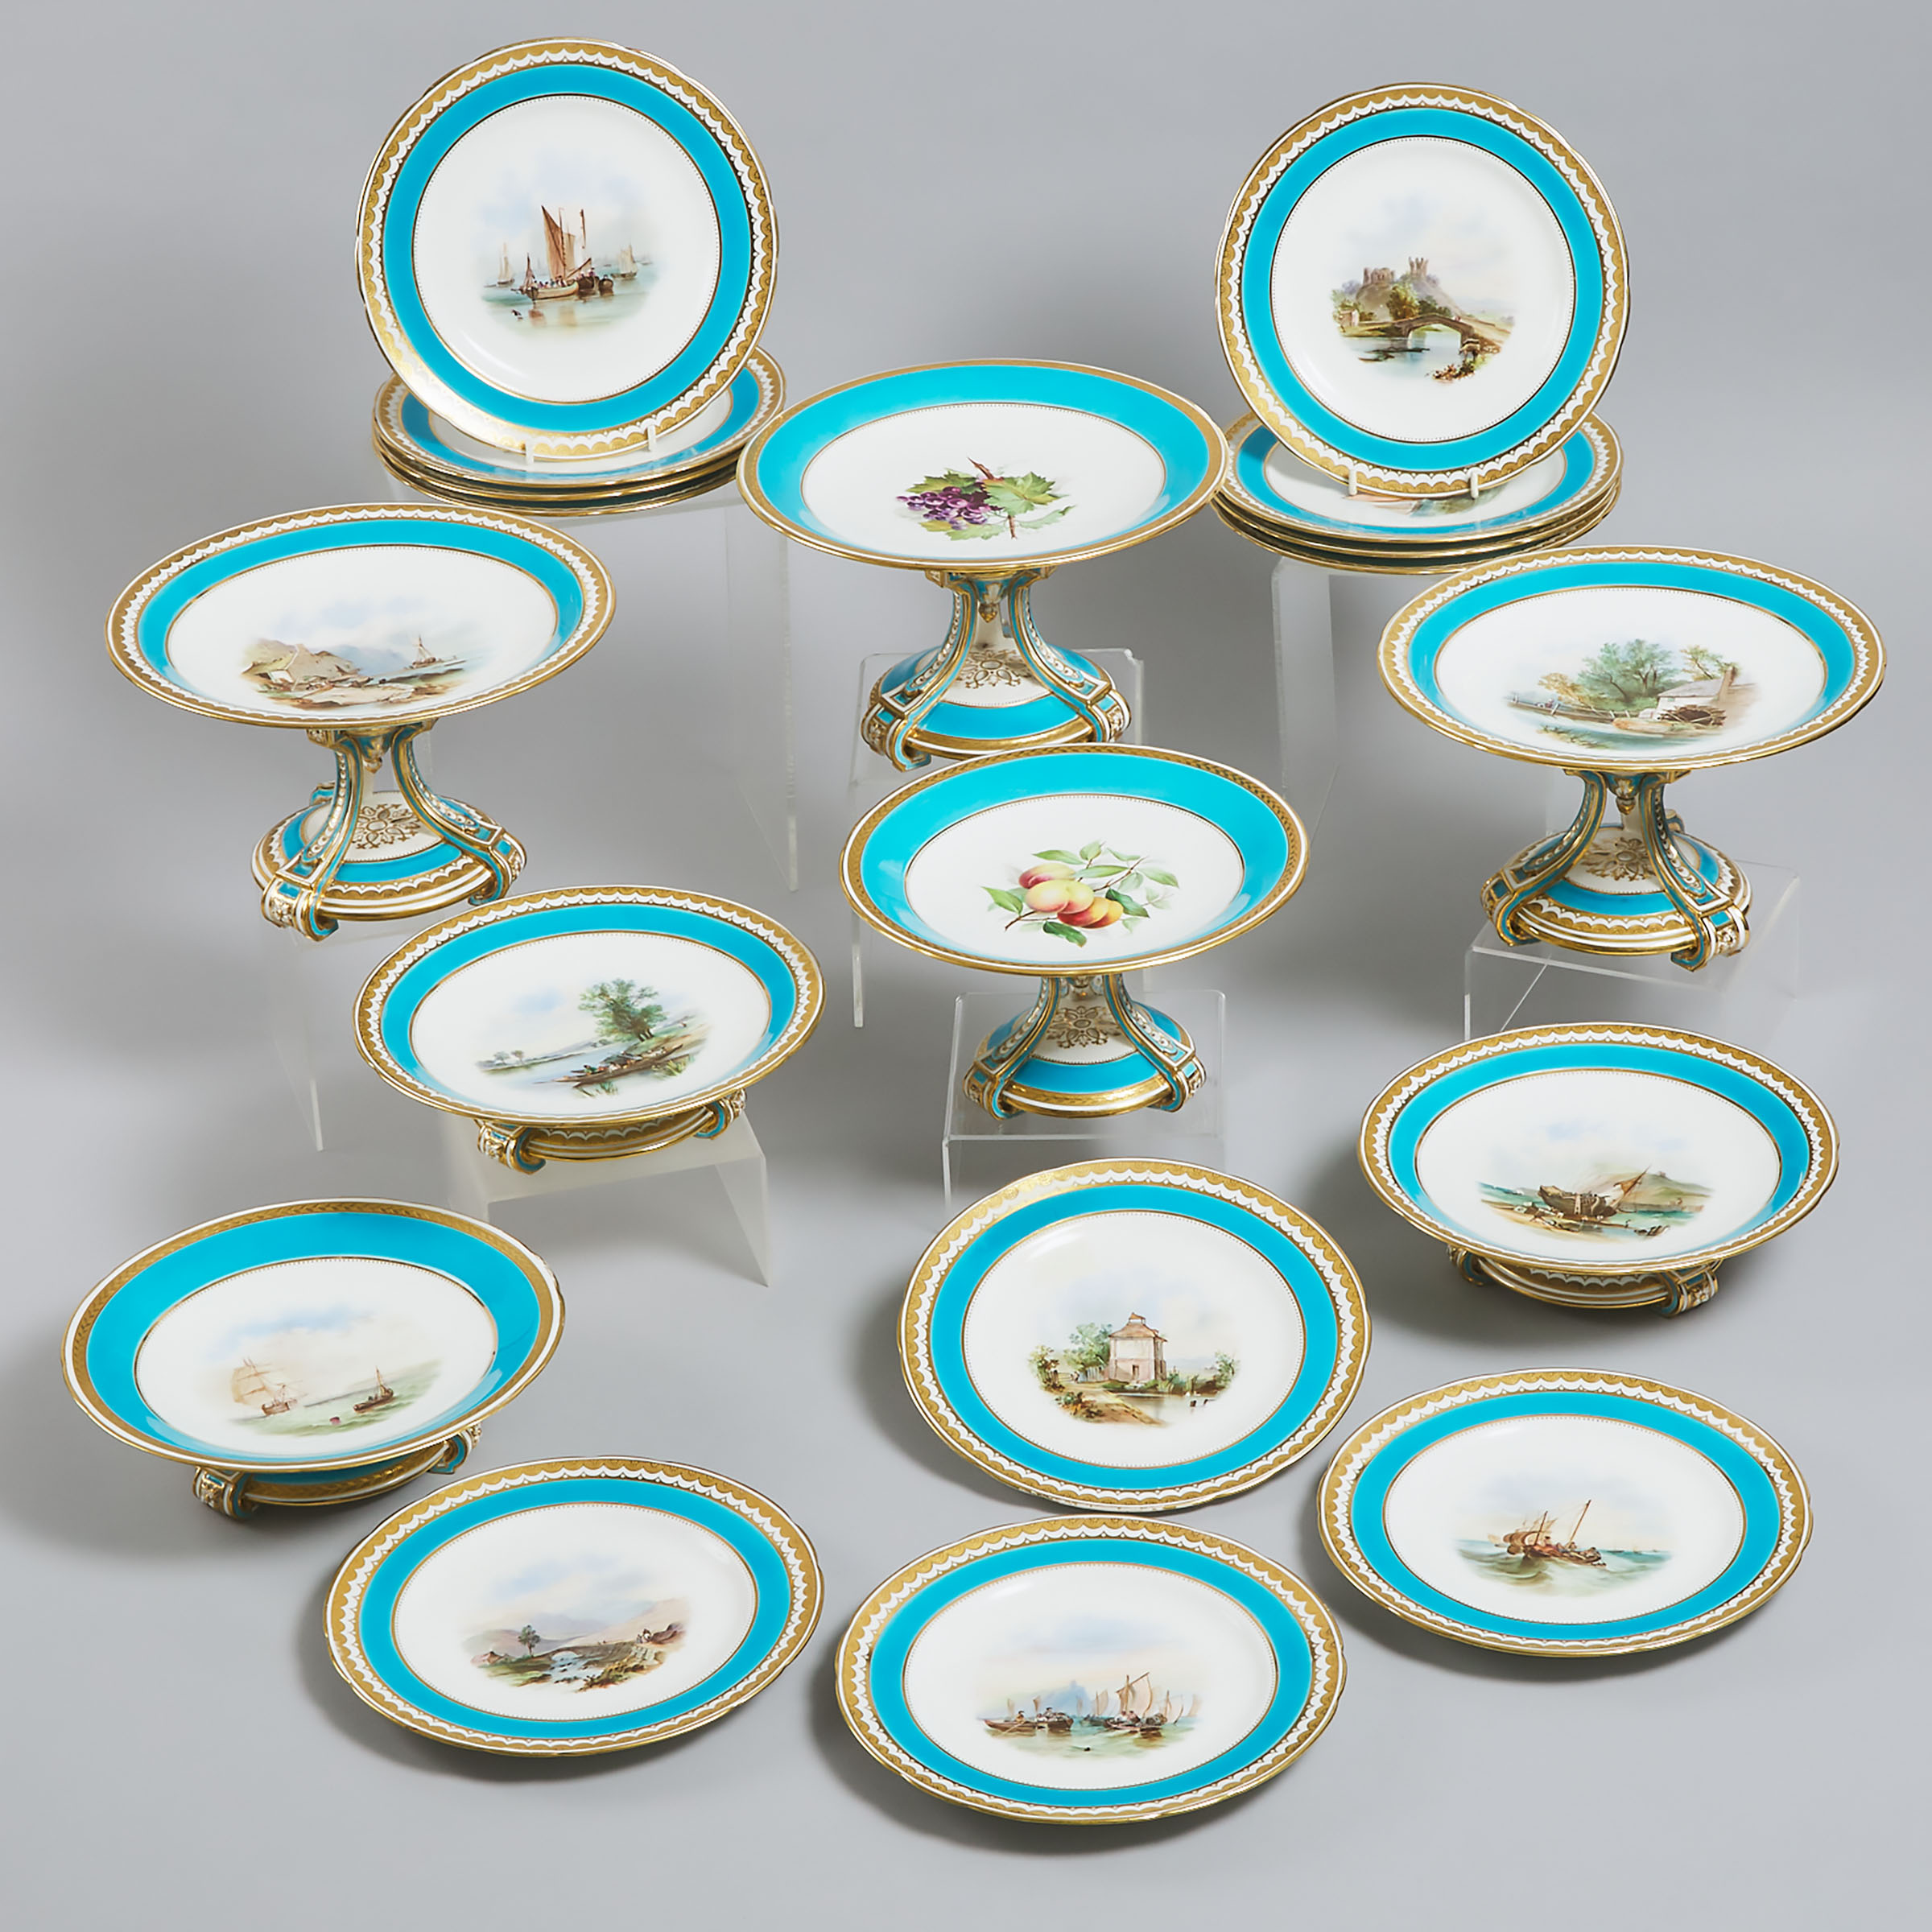 Minton Turquoise and Gilt Banded Dessert Service, c.1870-72